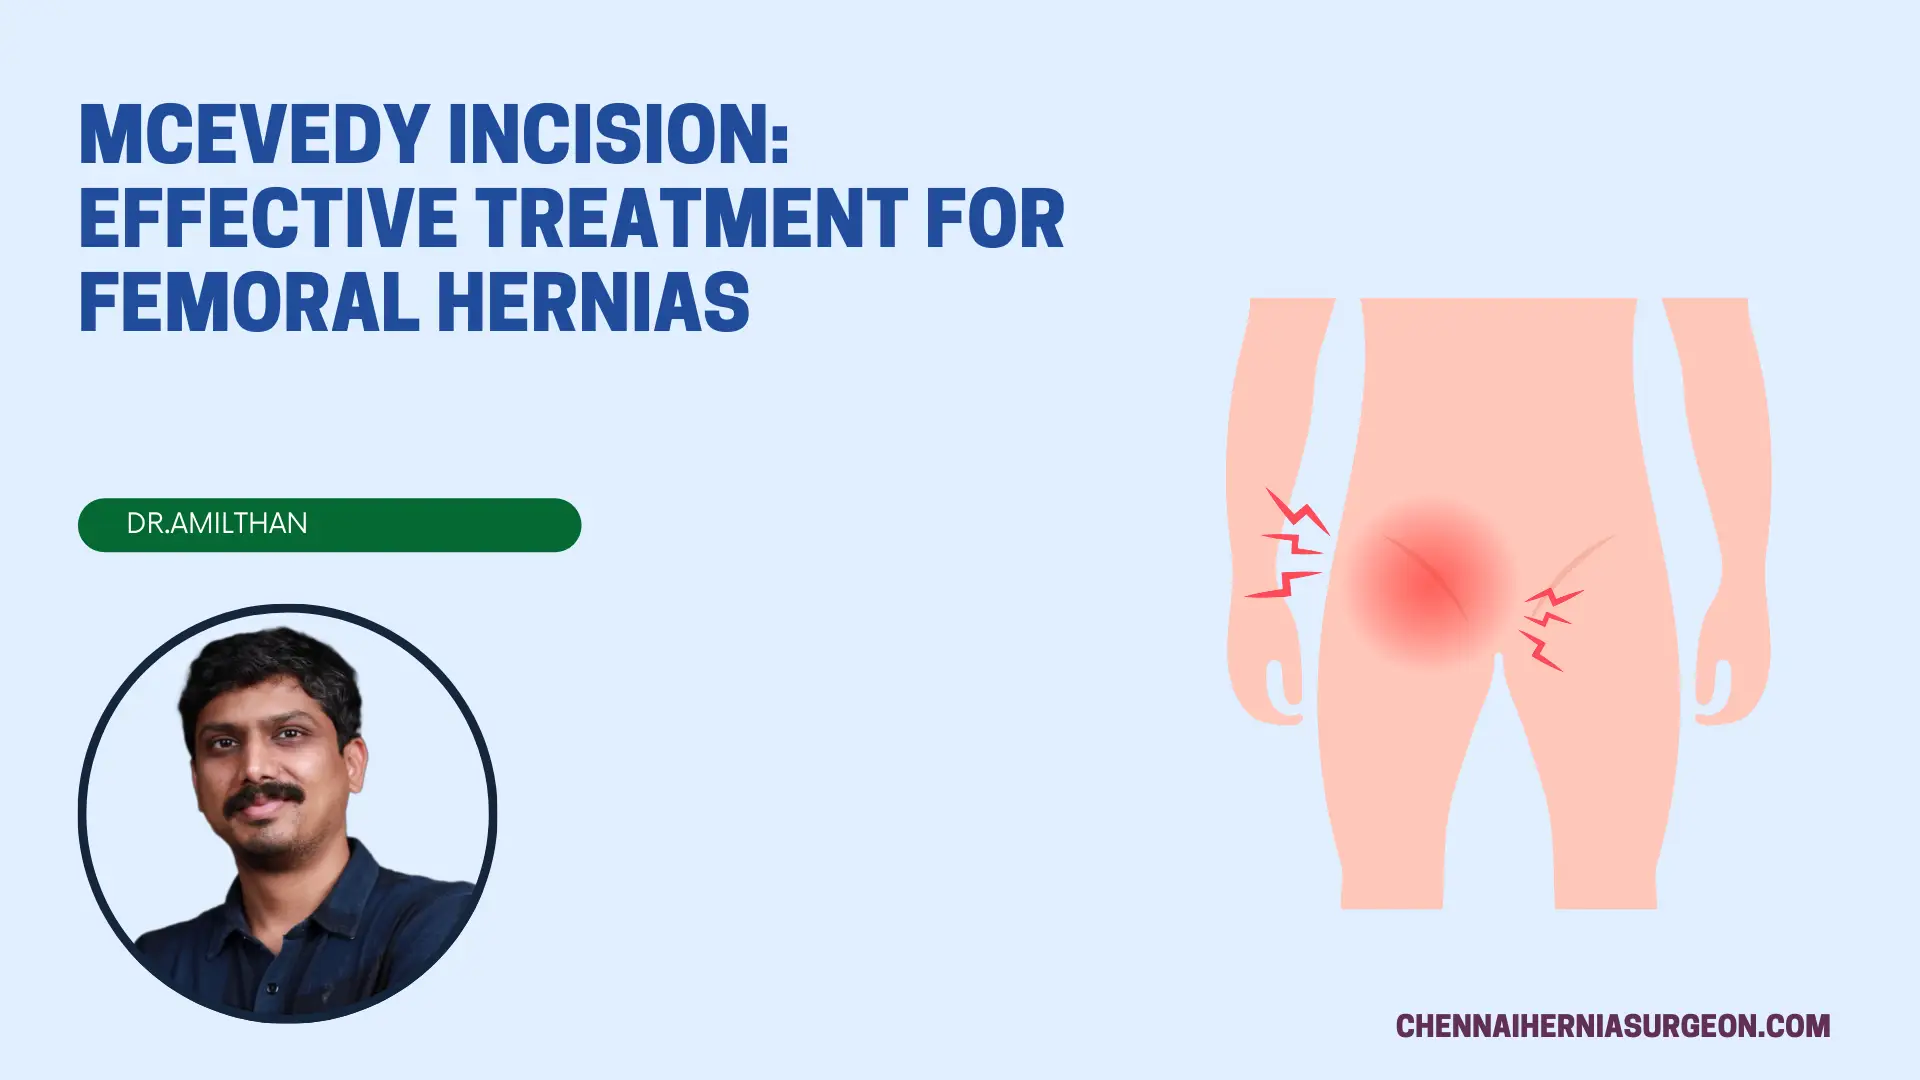 McEvedy Incision Effective Treatment for Femoral Hernias